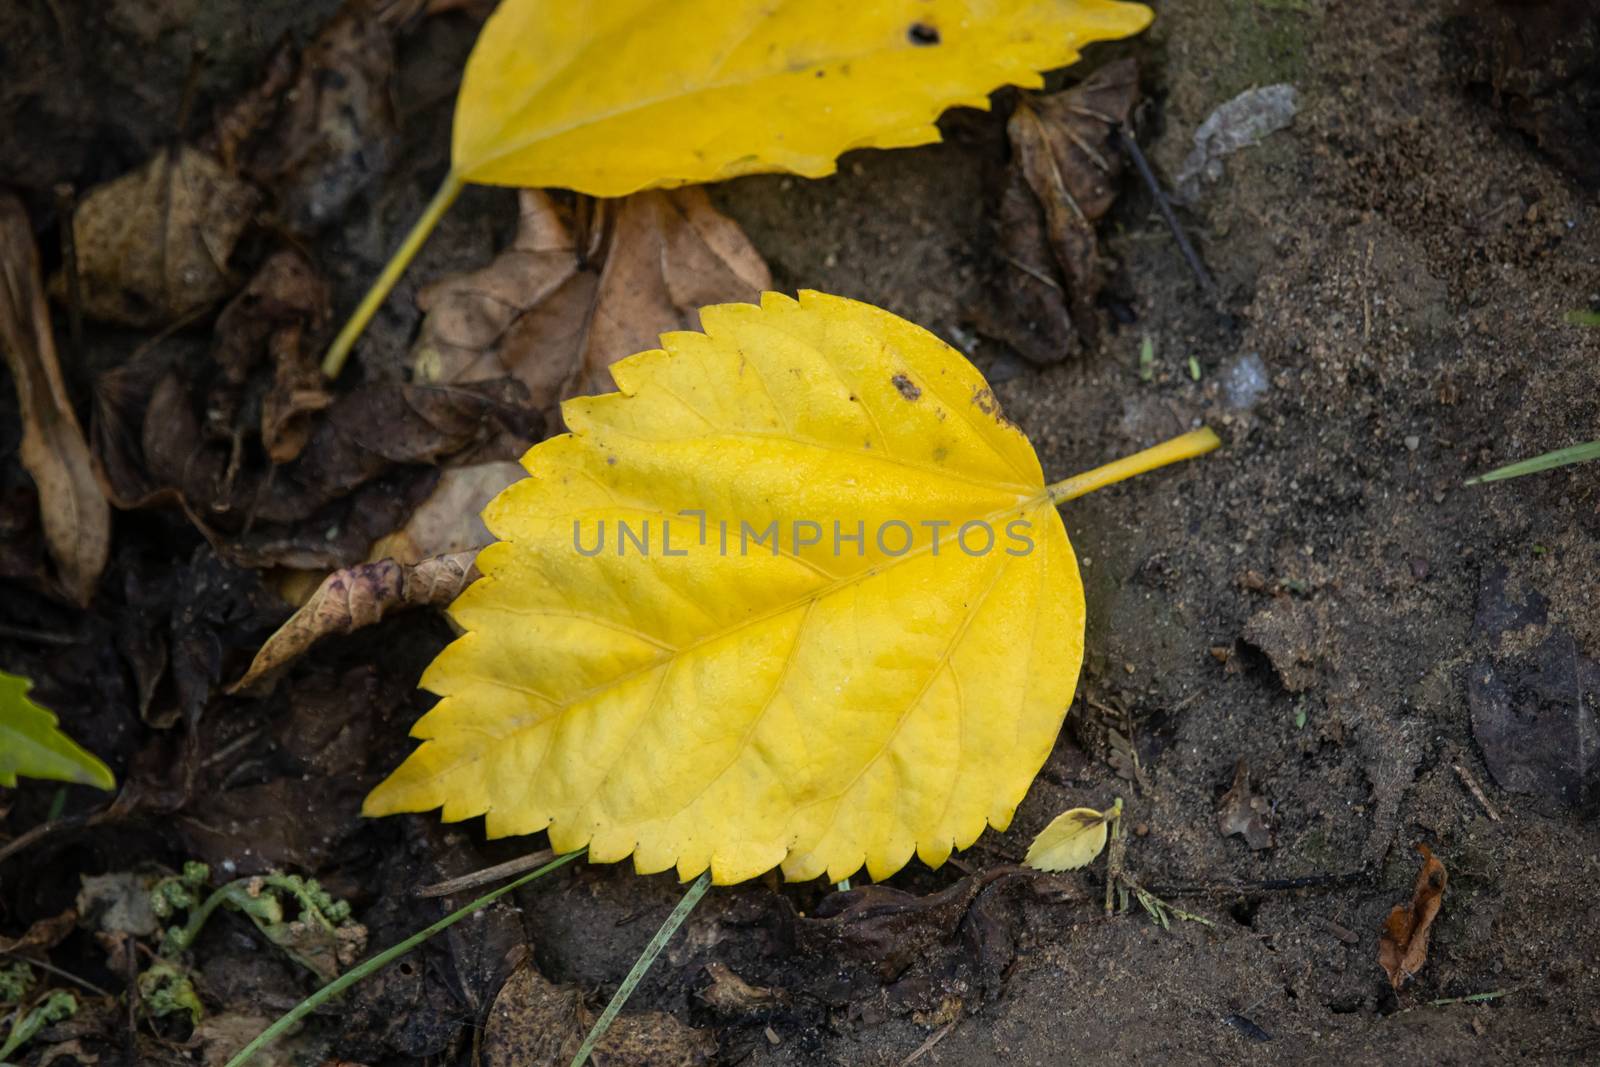 During the winter morning, the dewy yellow leaf lying on the ground by 9500102400